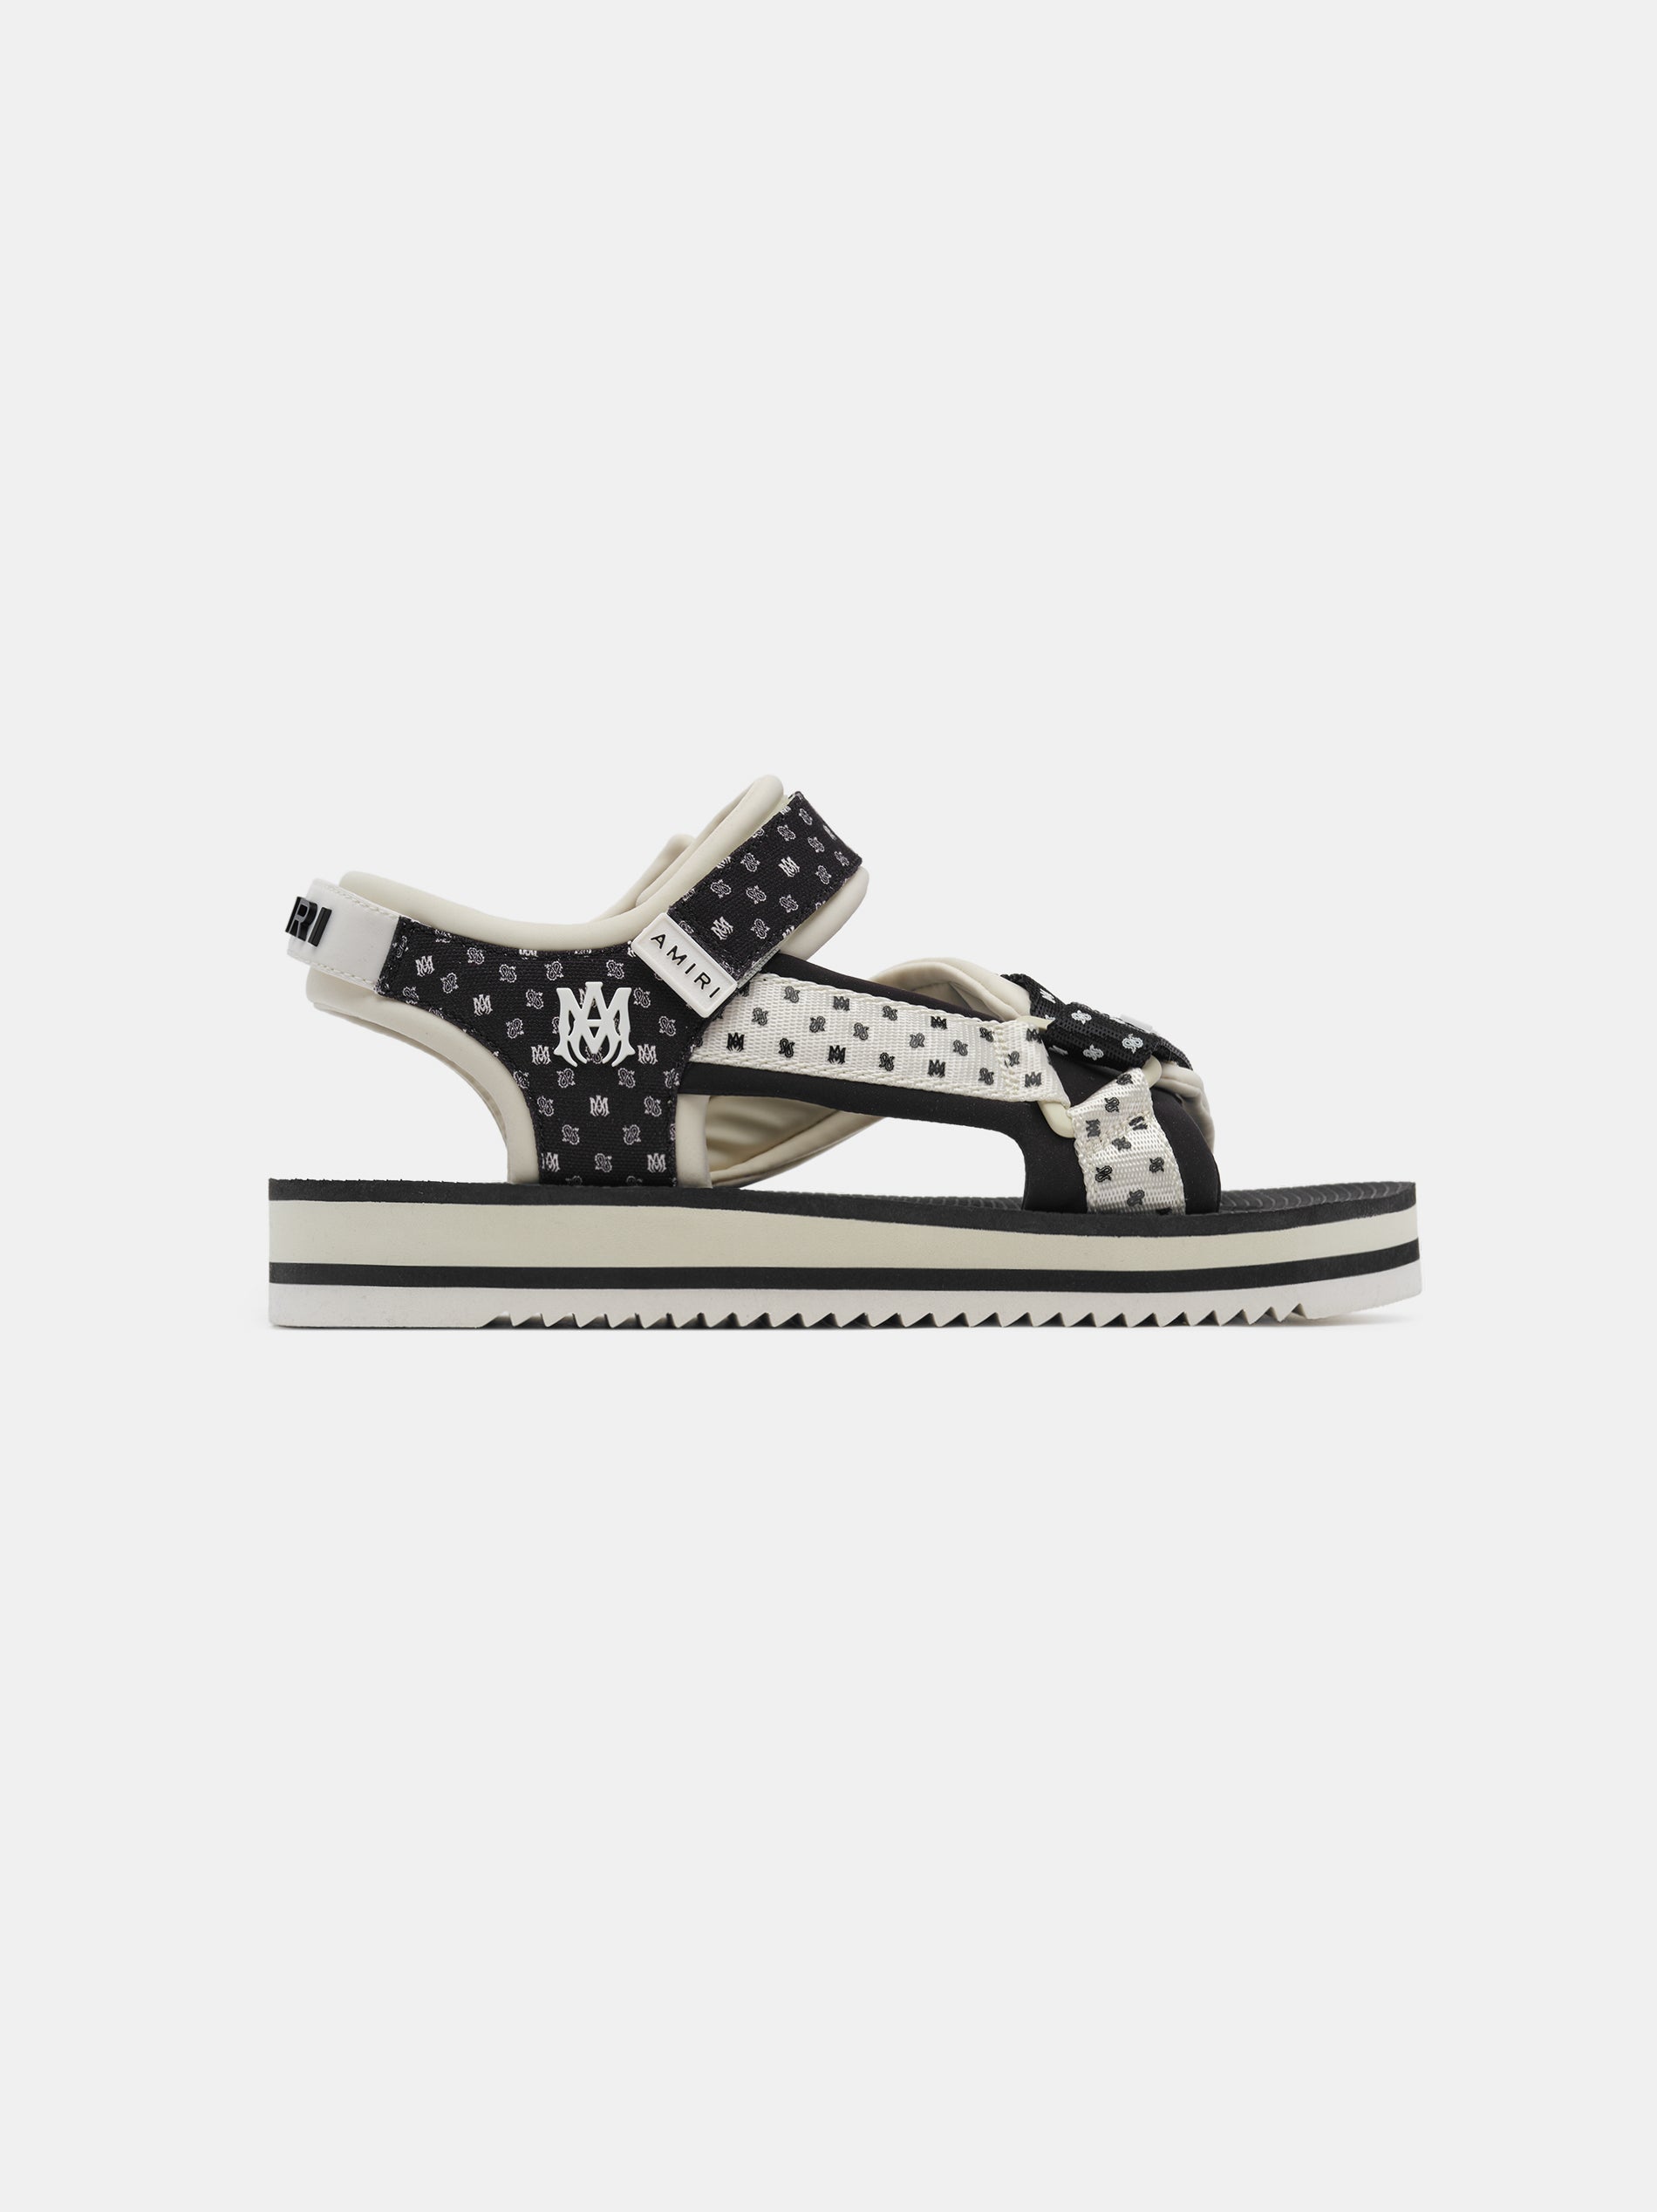 Product MA PAISLEY SANDAL - Black Birch featured image